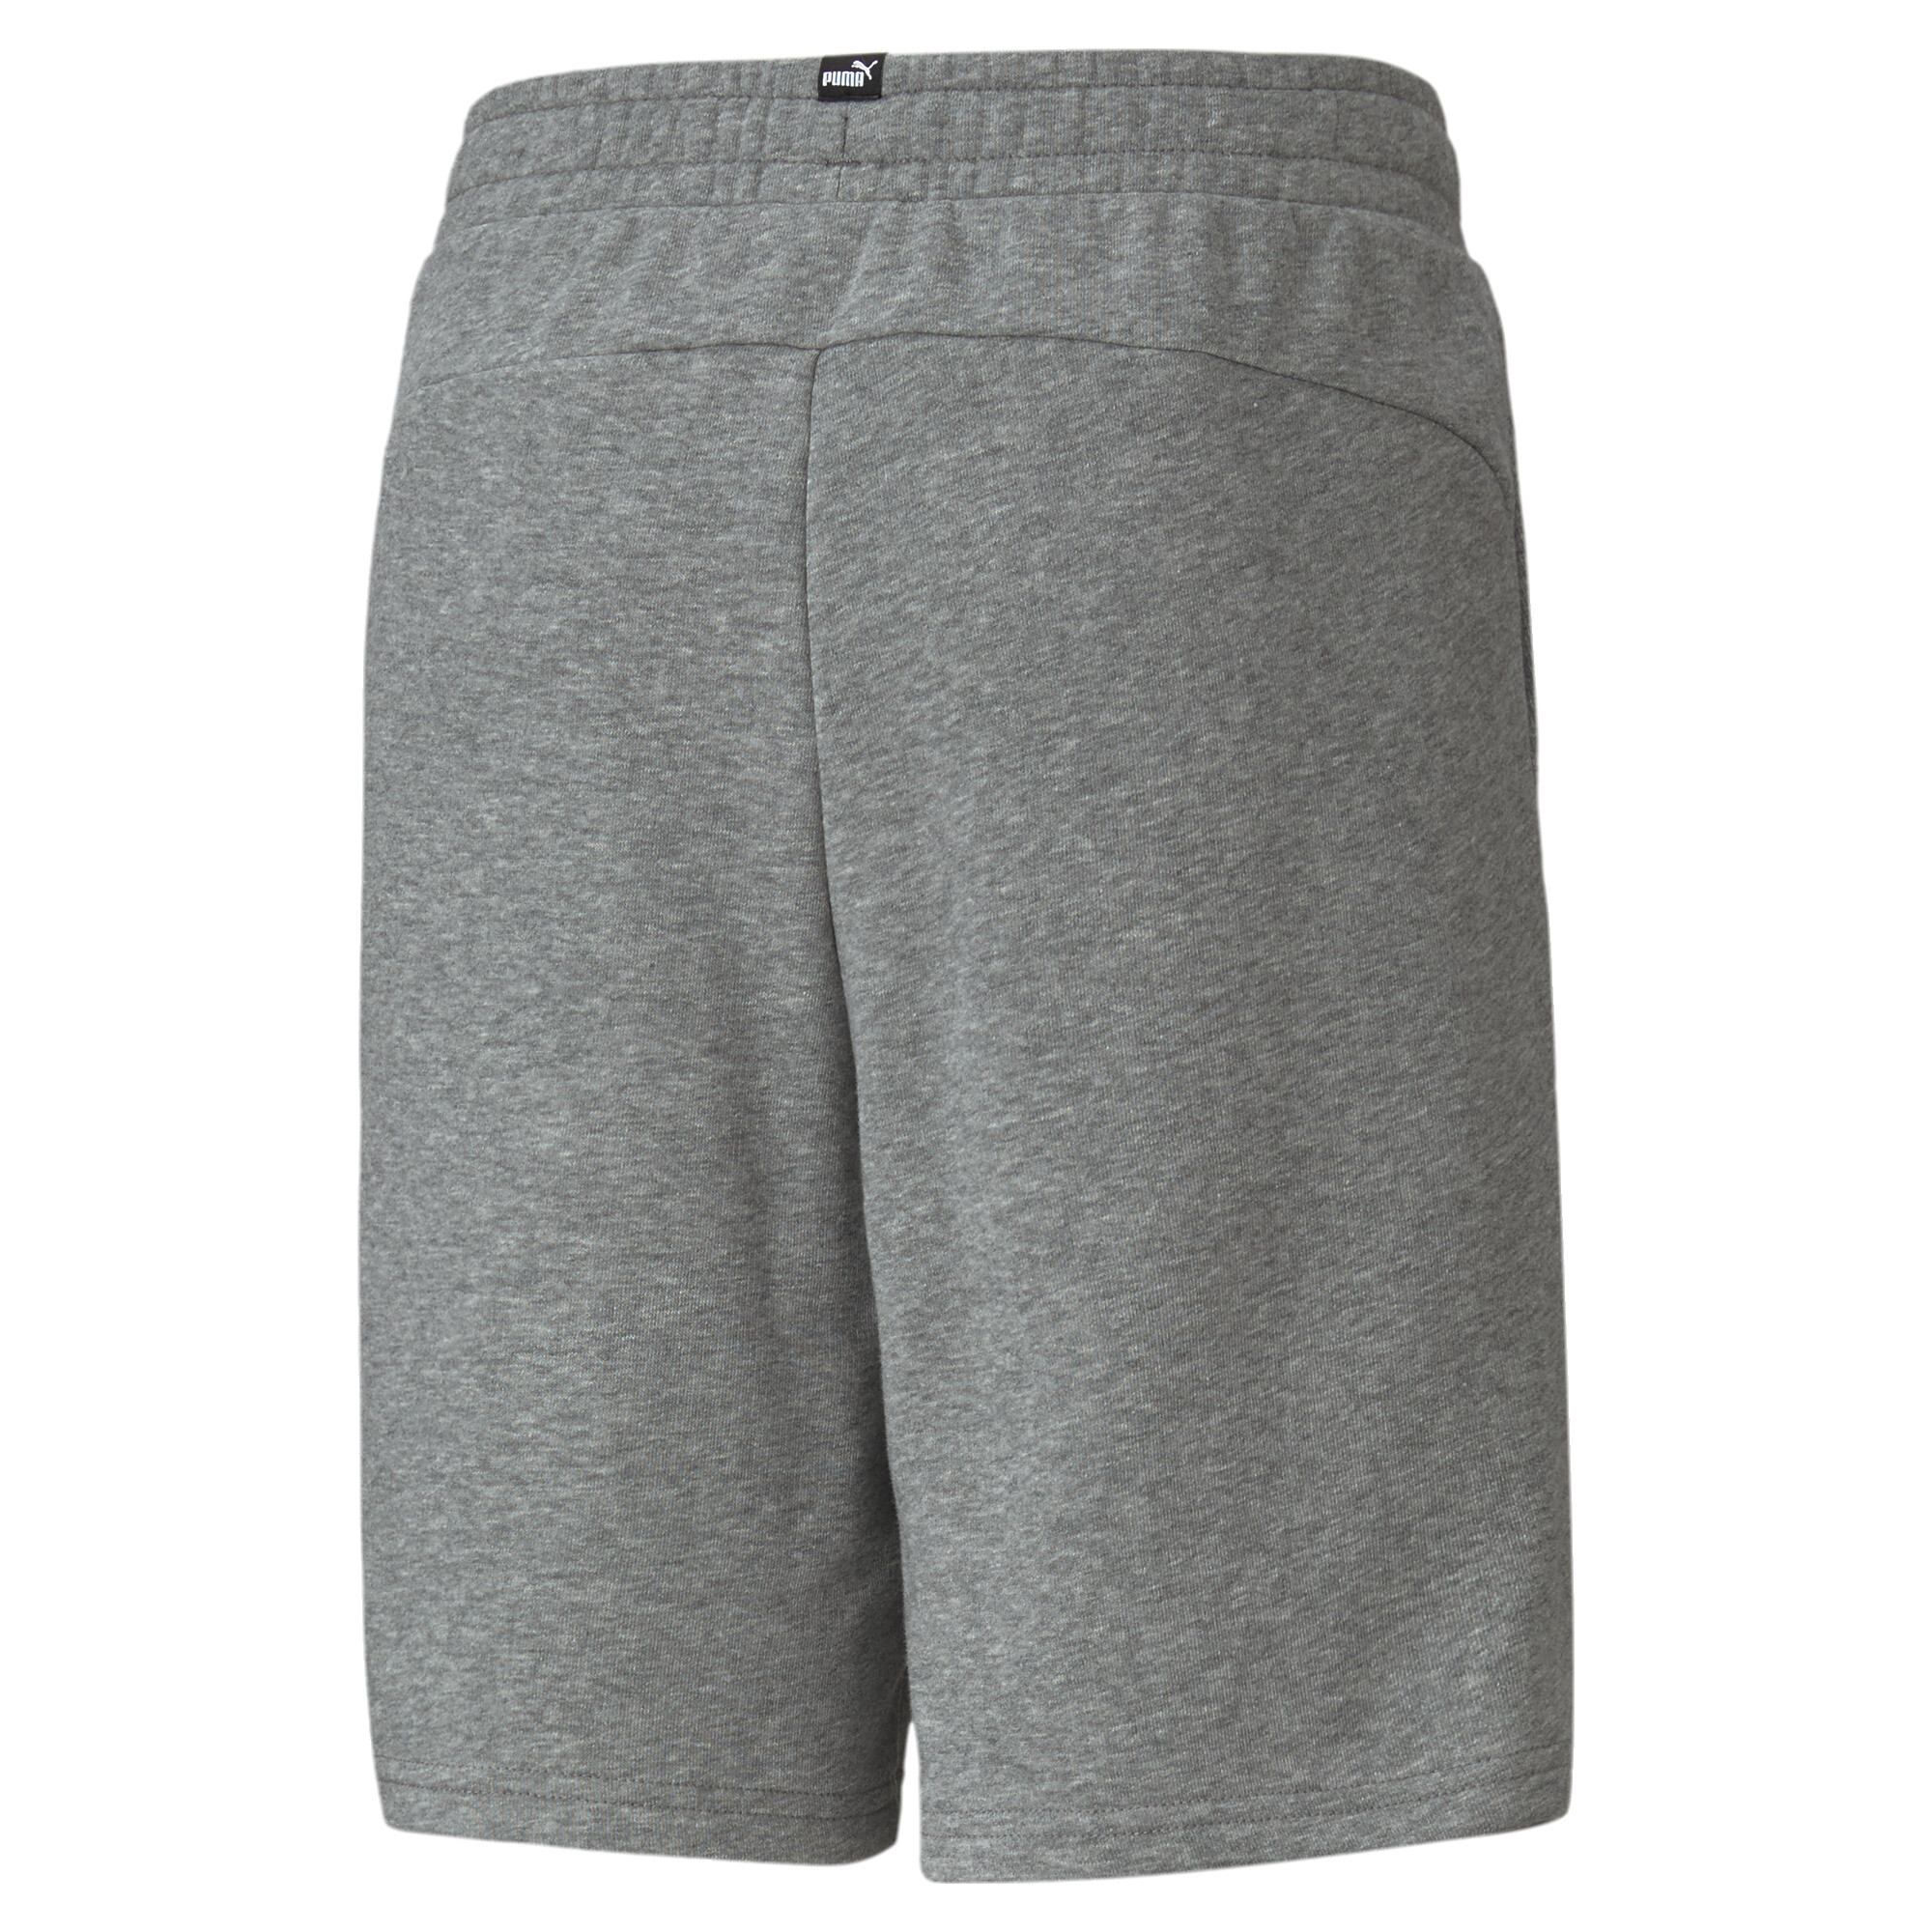 PUMA Essentials Sweat Shorts In Heather, Size 9-10 Youth